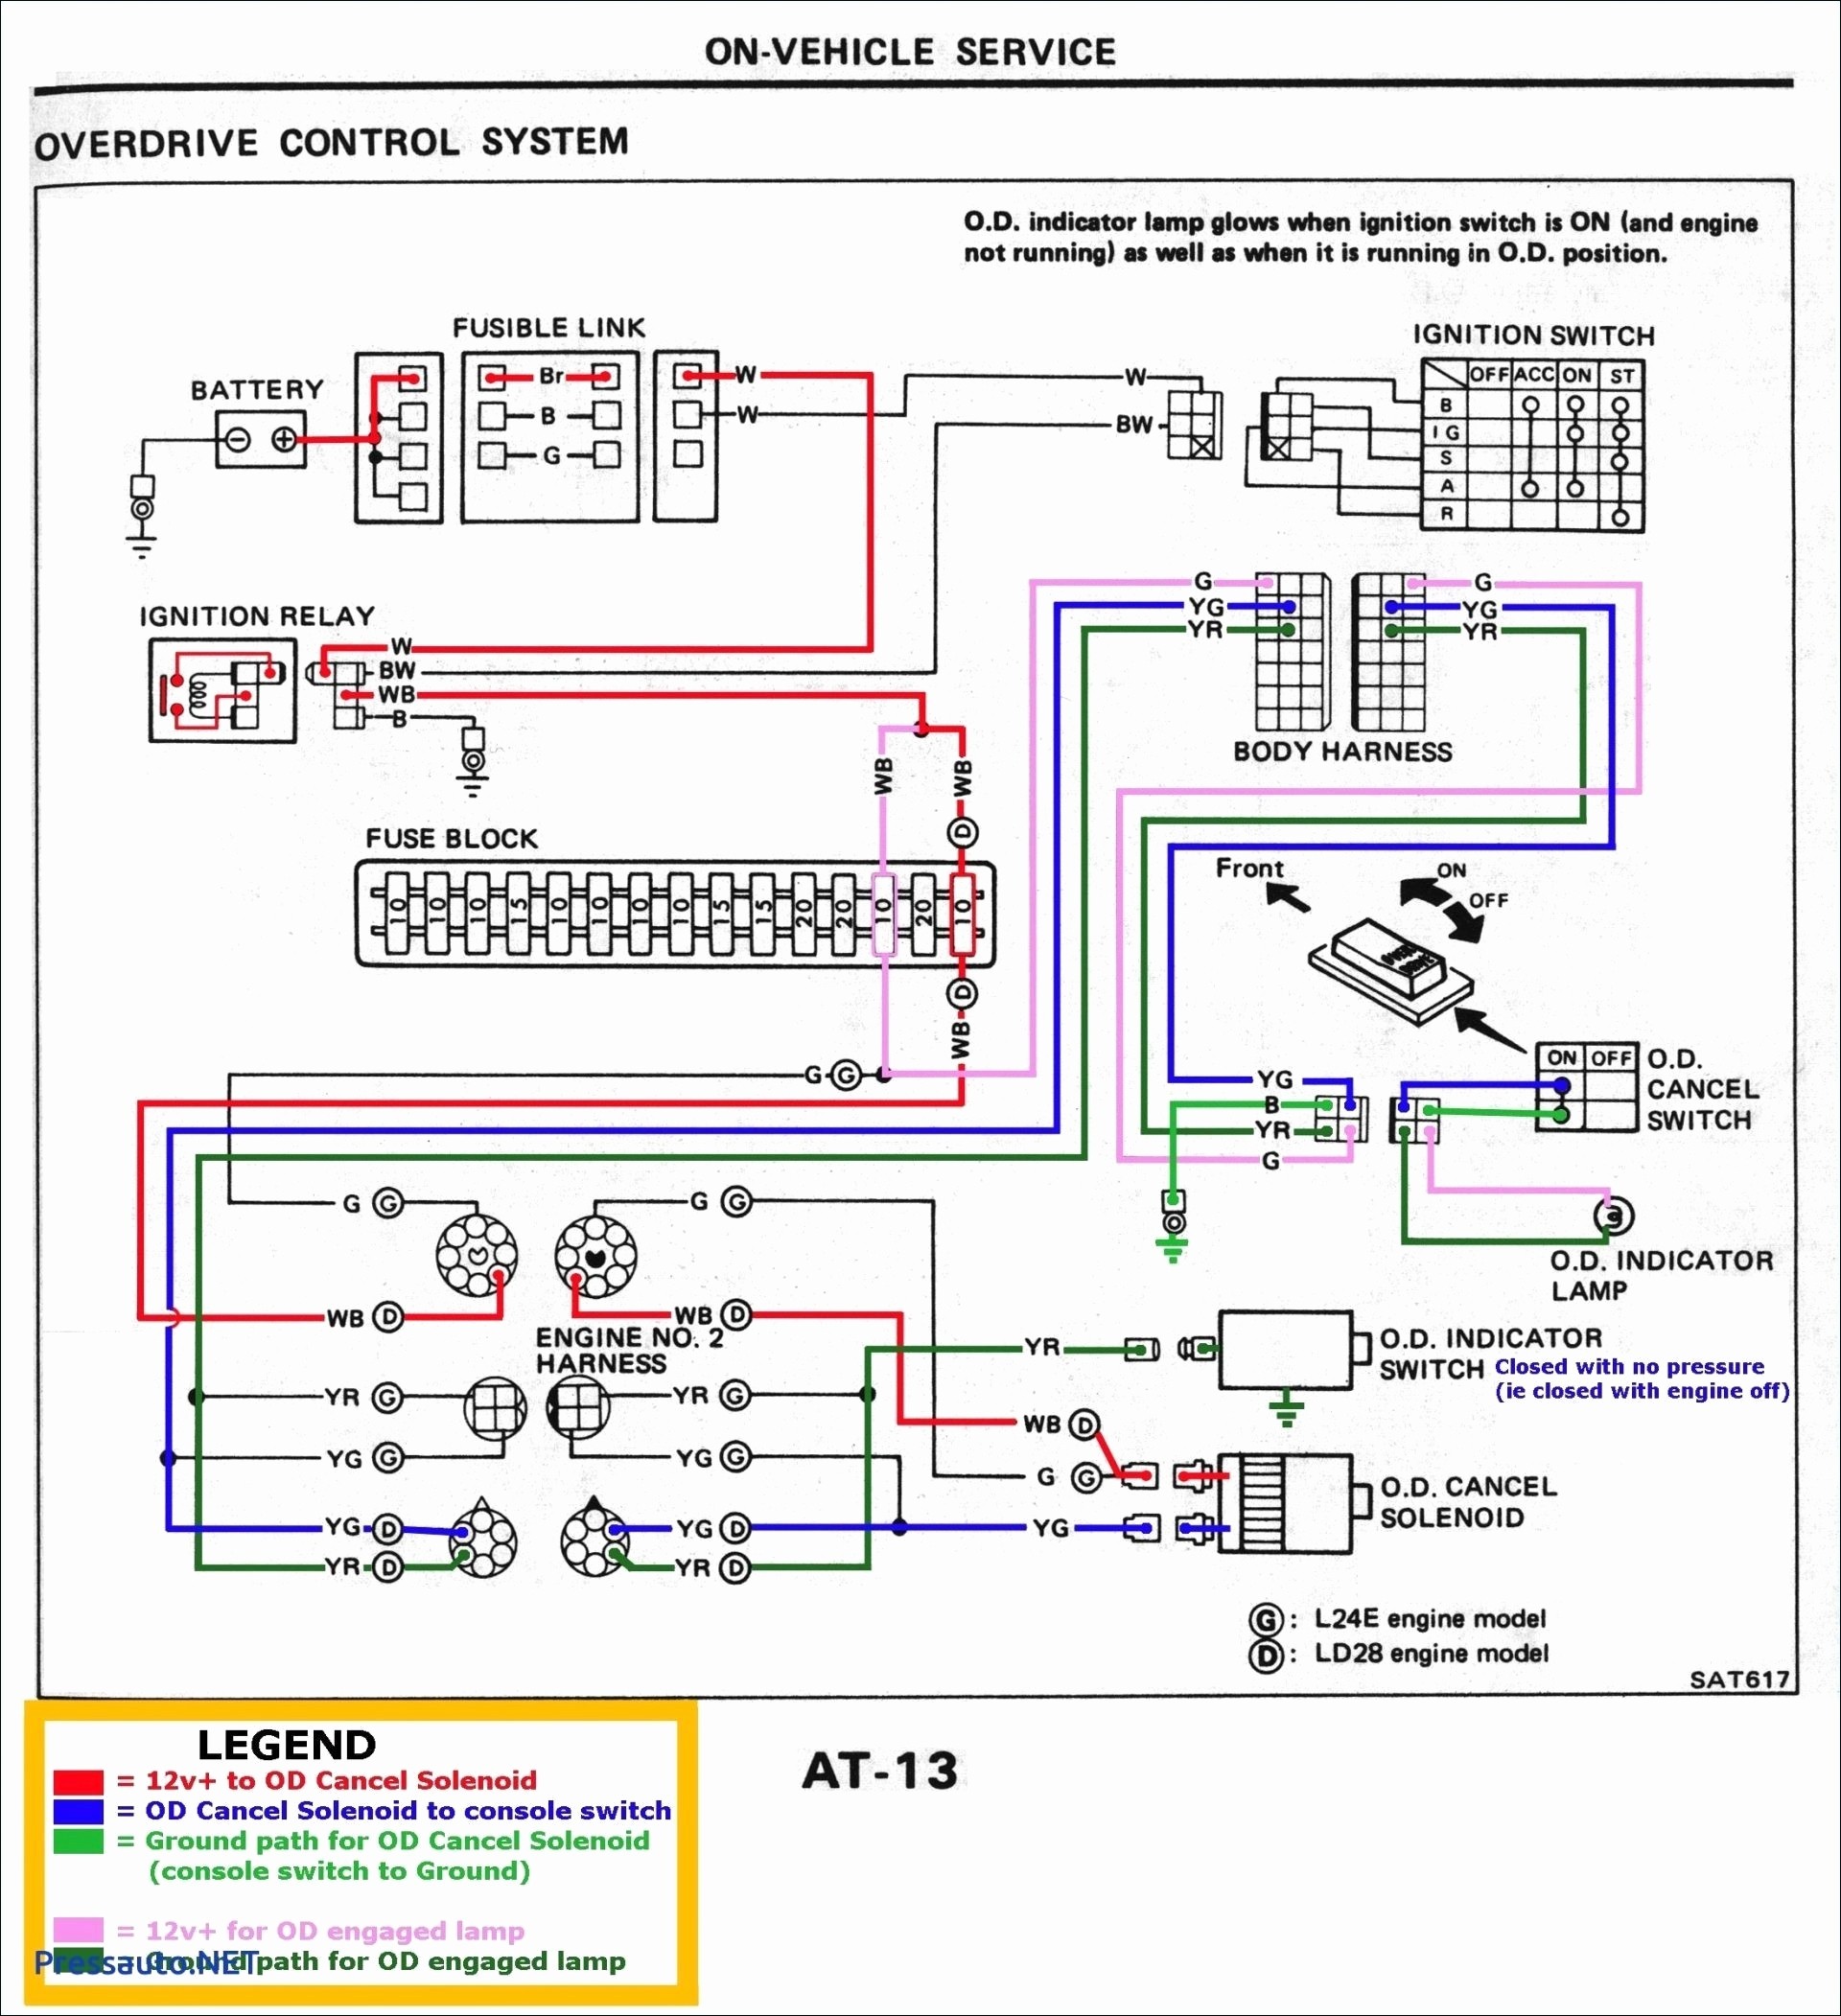 Diagram Of A 4 Stroke Engine Yamaha Outboard Wiring Diagram 15 Of Diagram Of A 4 Stroke Engine